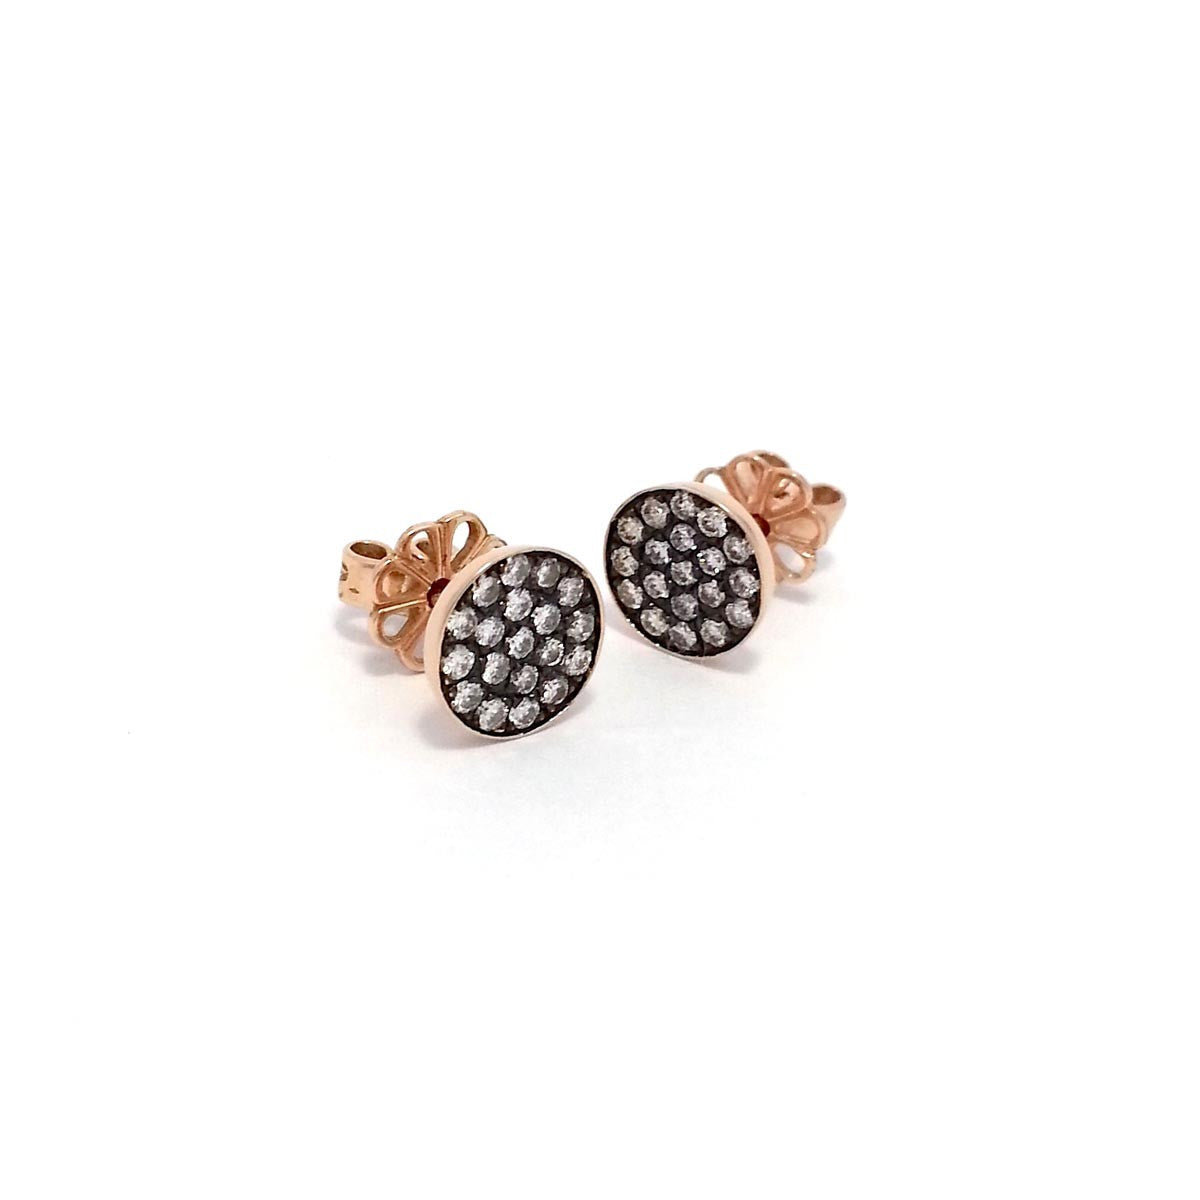 Vintage Round Pave Earring